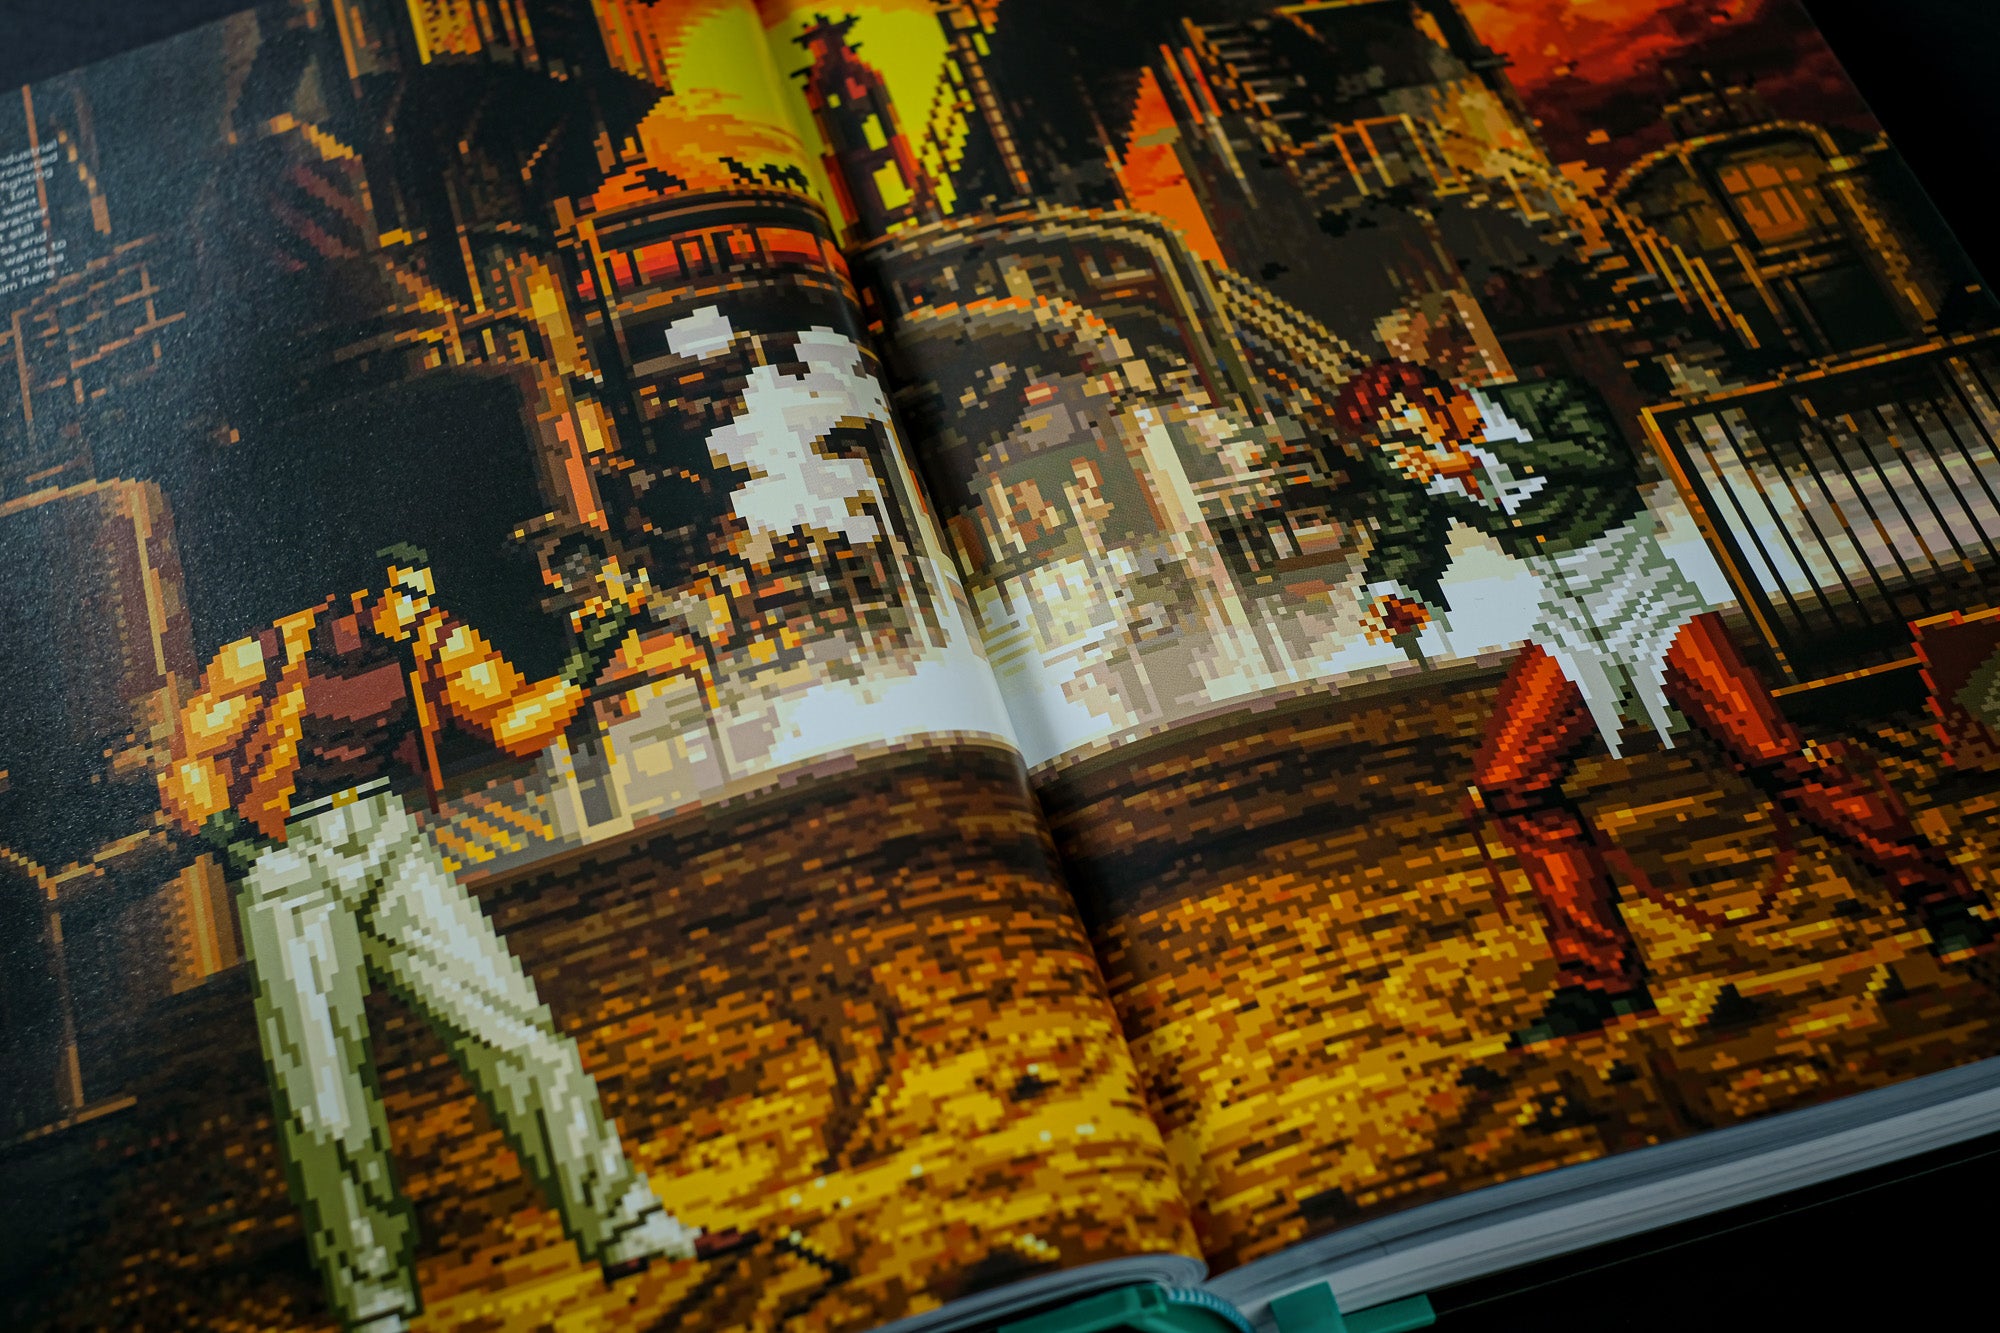 Fatal Fury Battle Archives Volume 1 Manual and Cover Scans : SNK